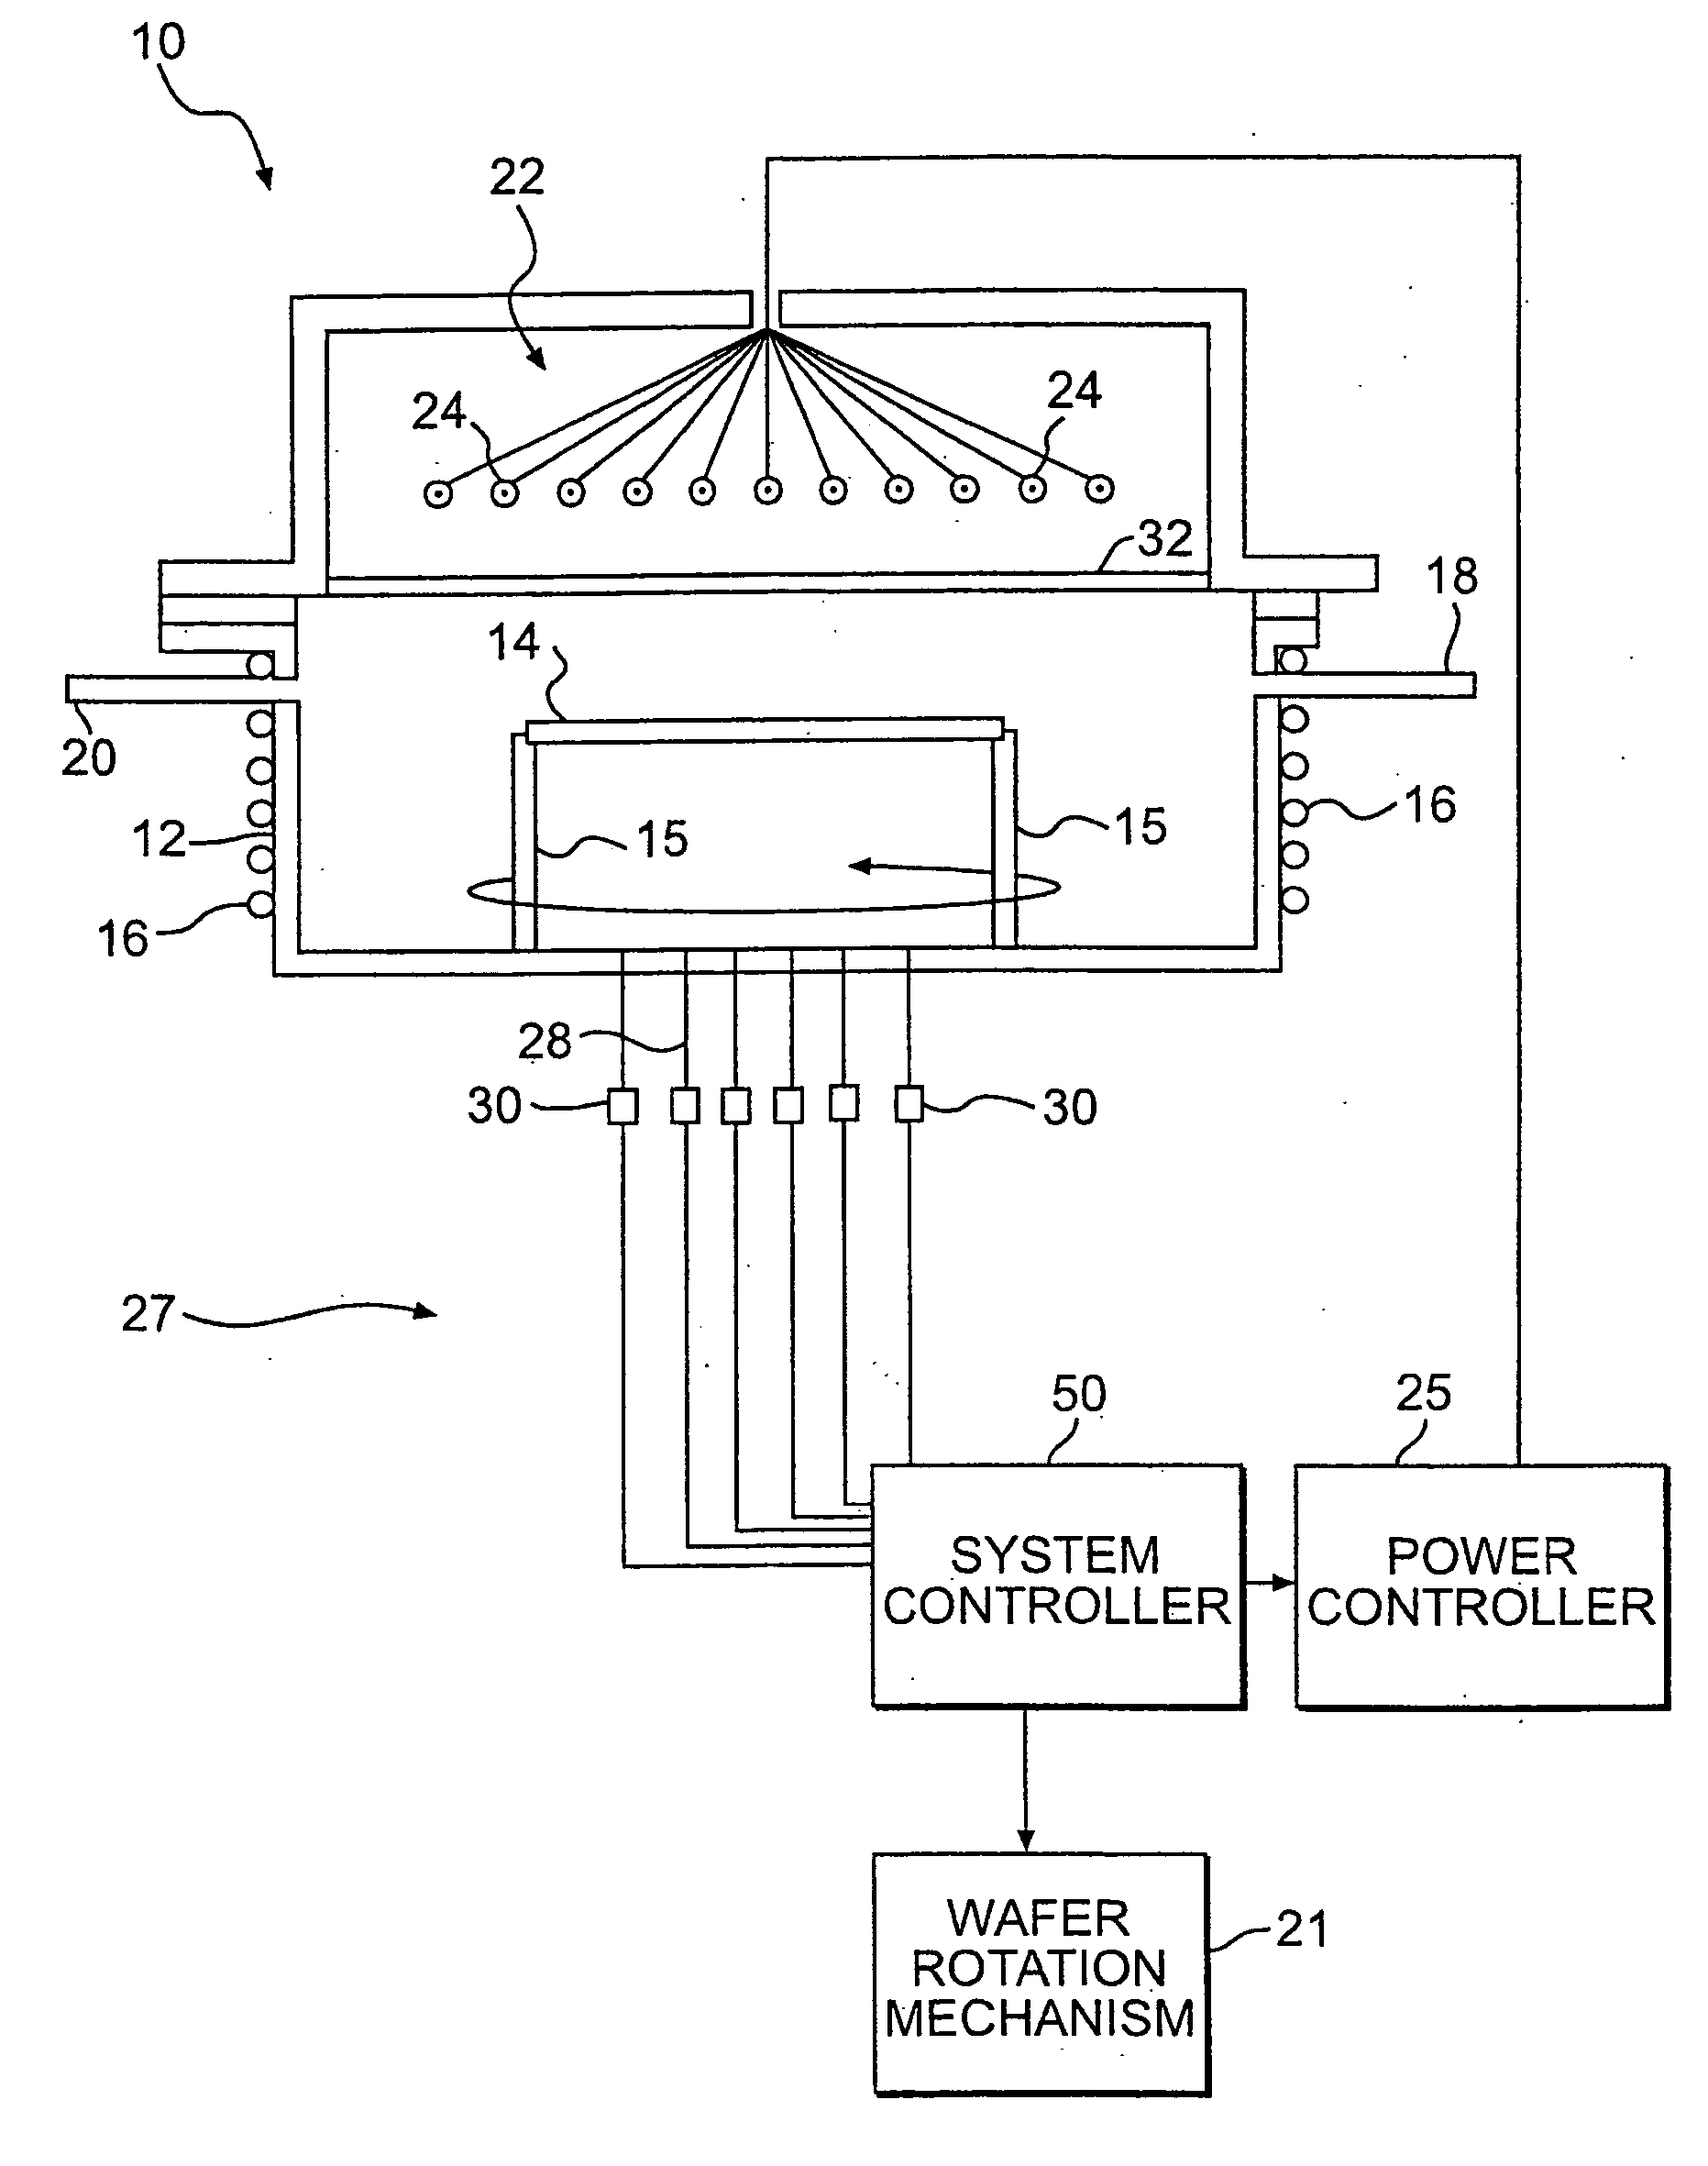 Heating device for heating semiconductor wafers in thermal processing chambers